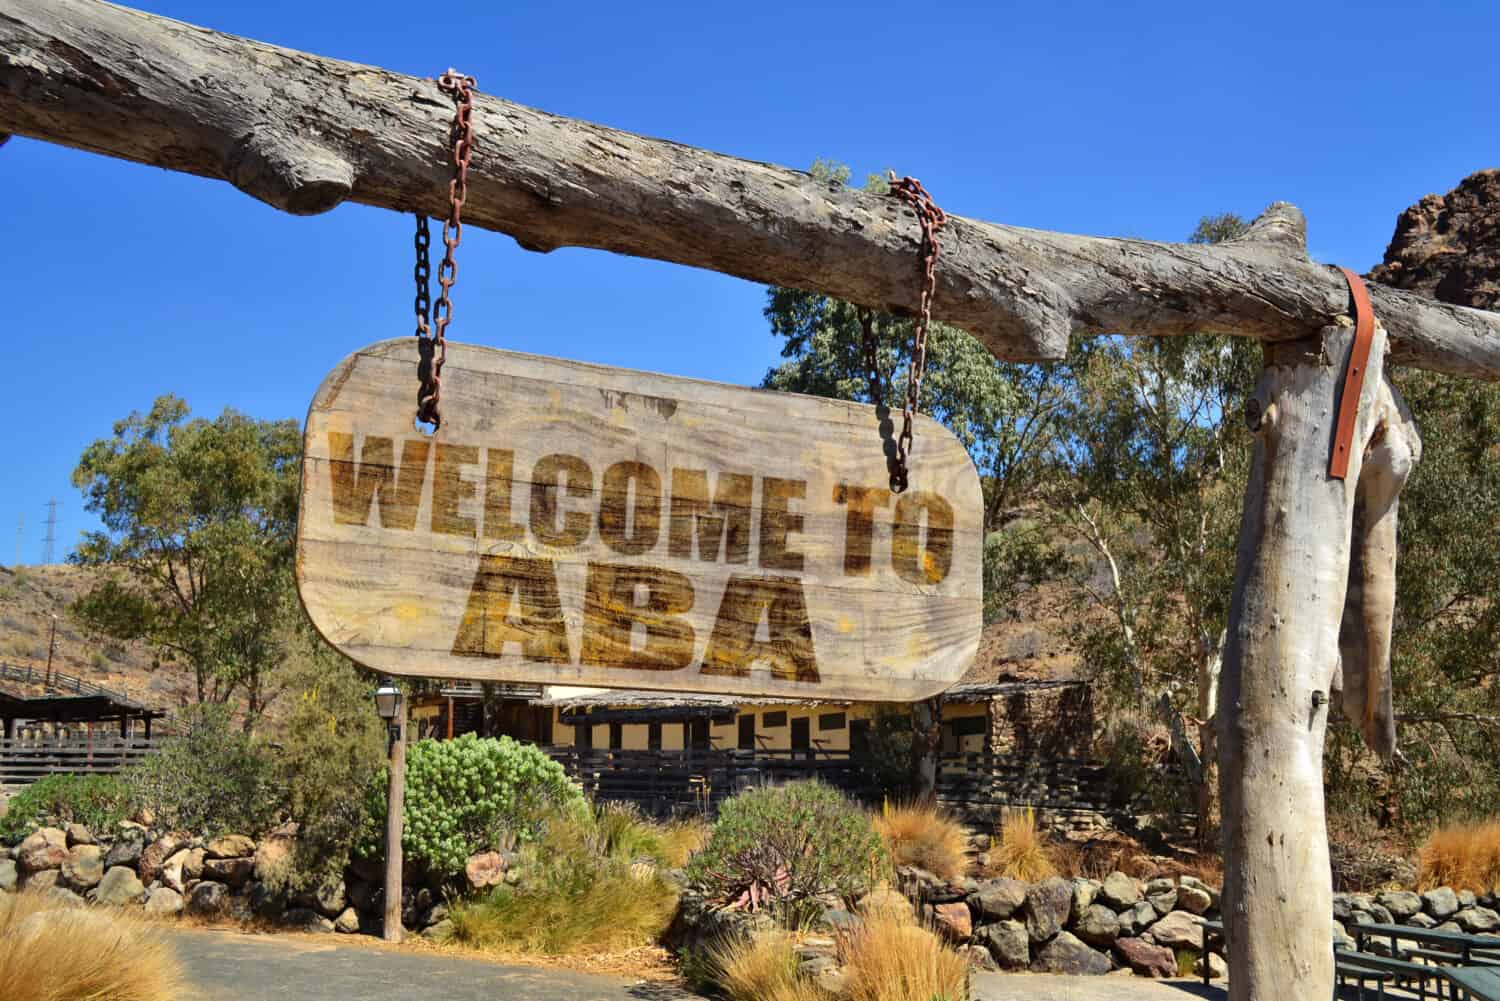 old vintage wood signboard with text " welcome to Aba" hanging on a branch